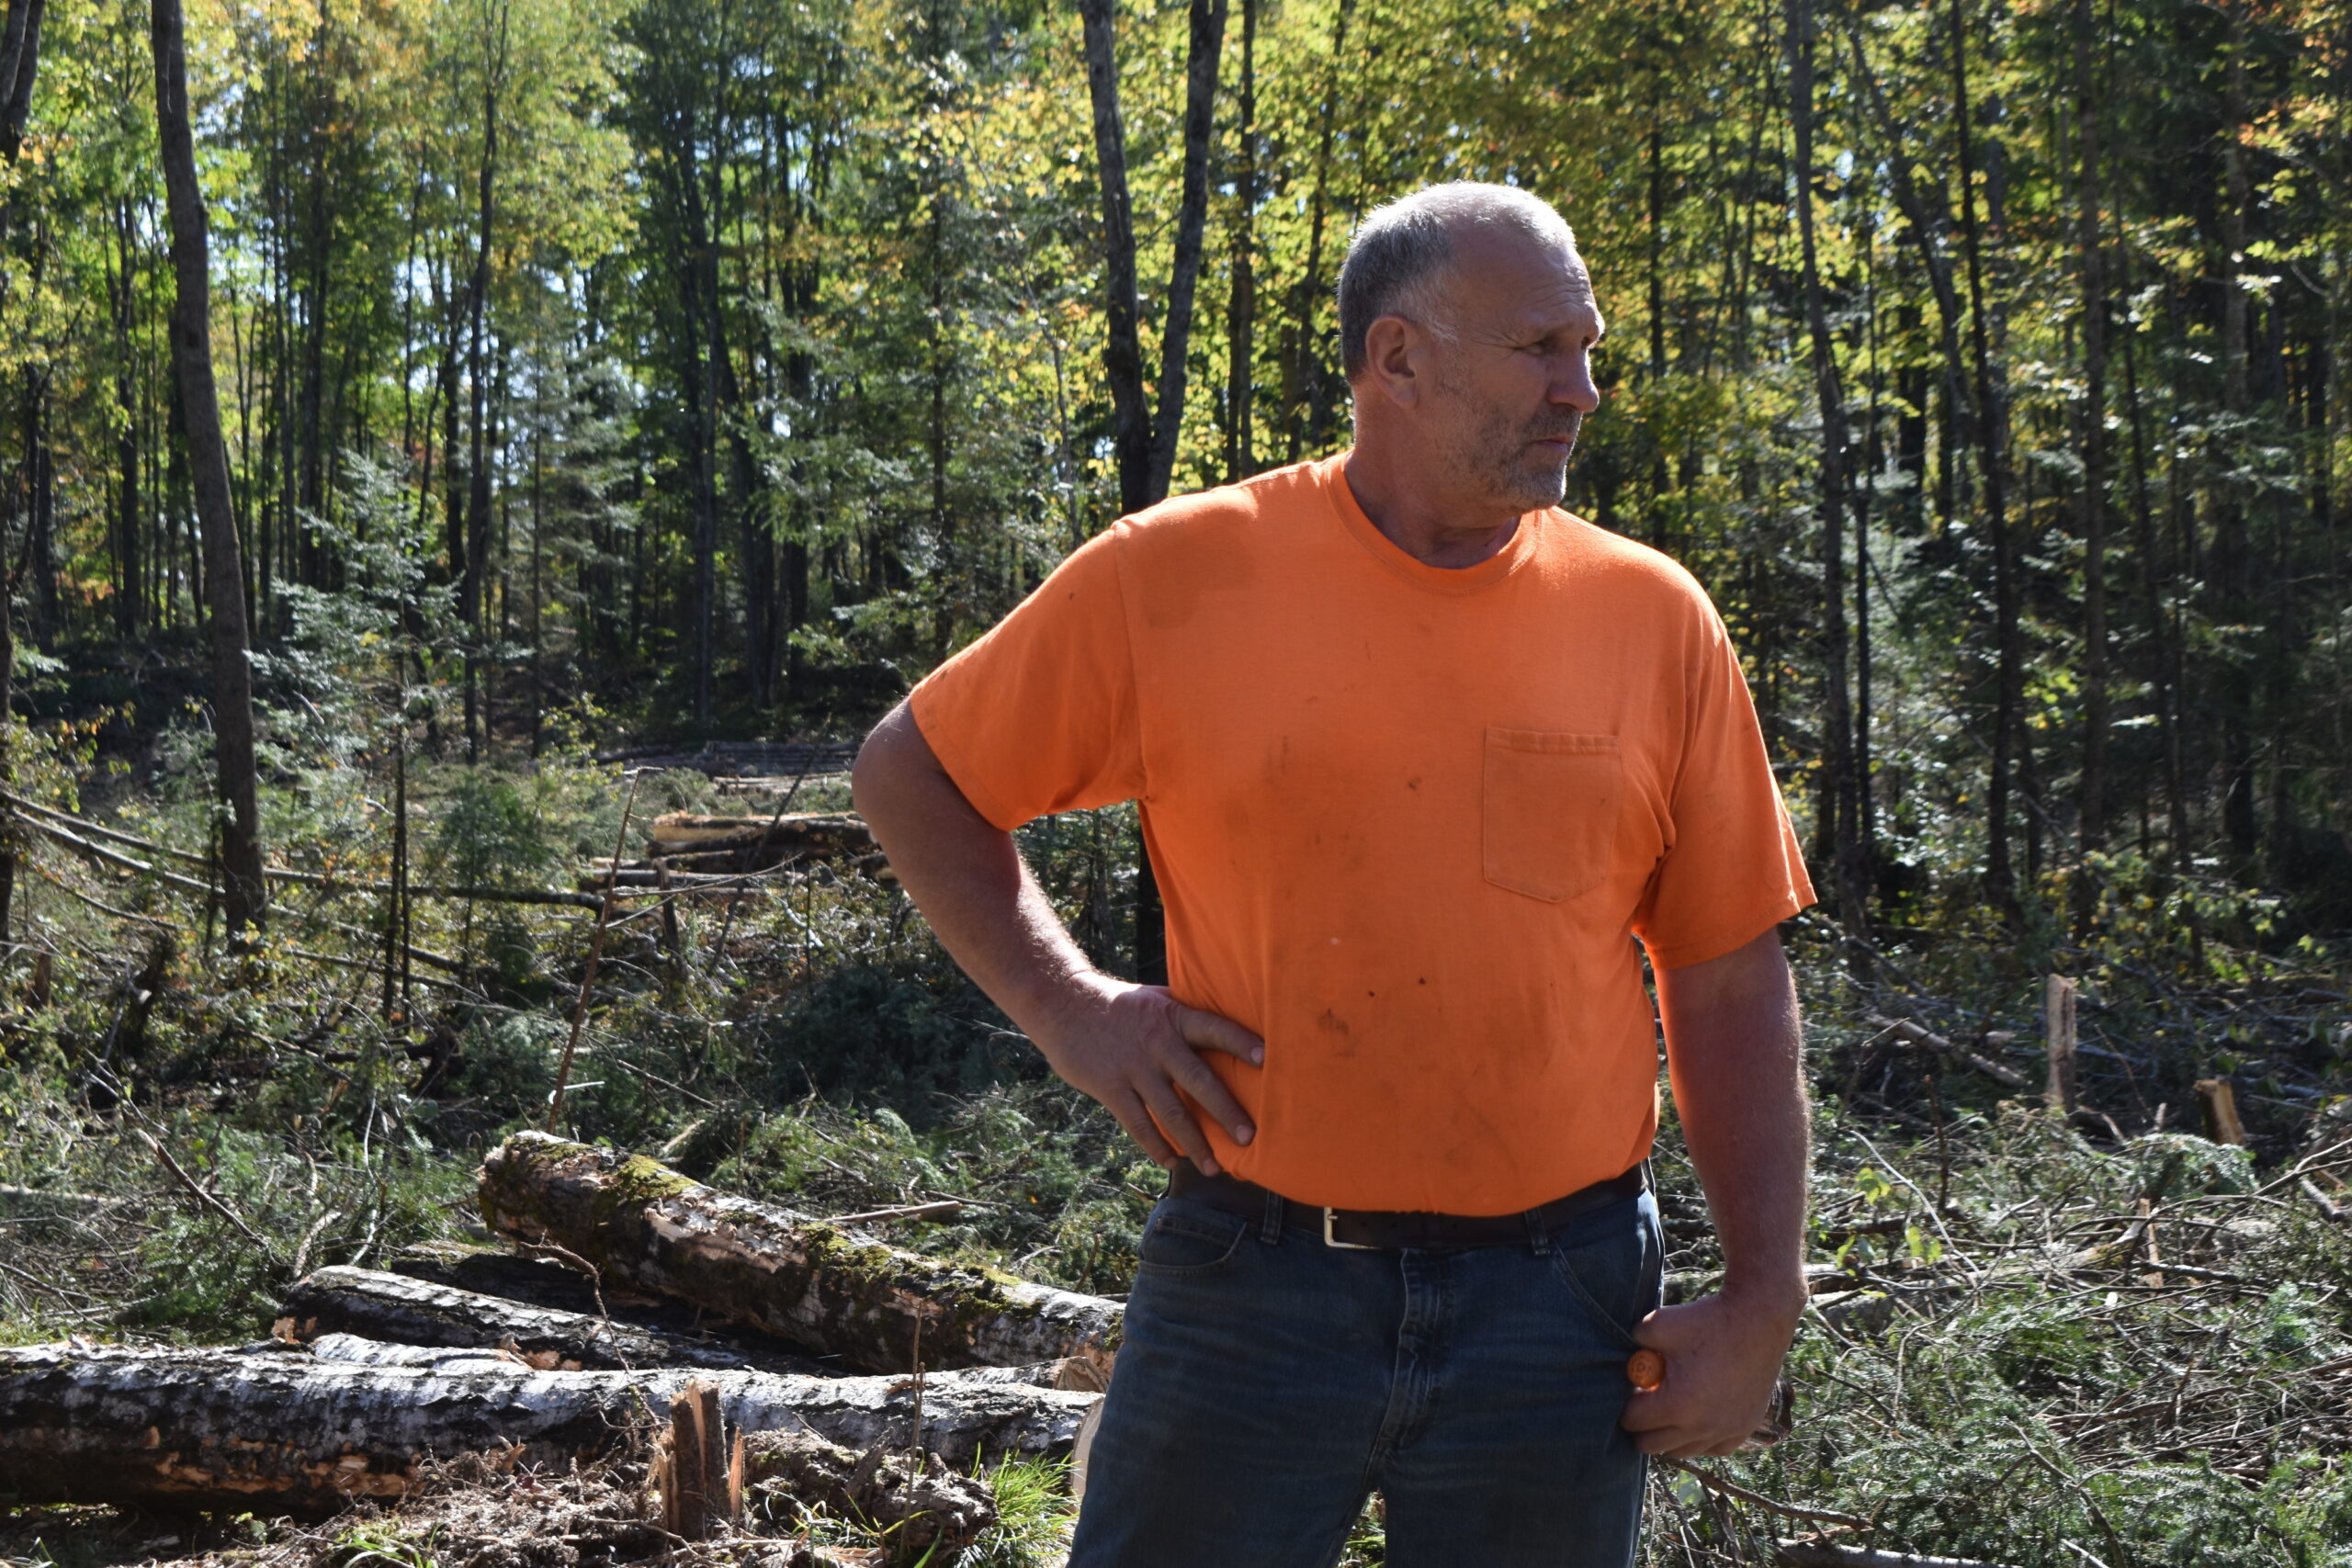 Paper mill closures drove a bust for Northwoods loggers, and some are leaving the industry